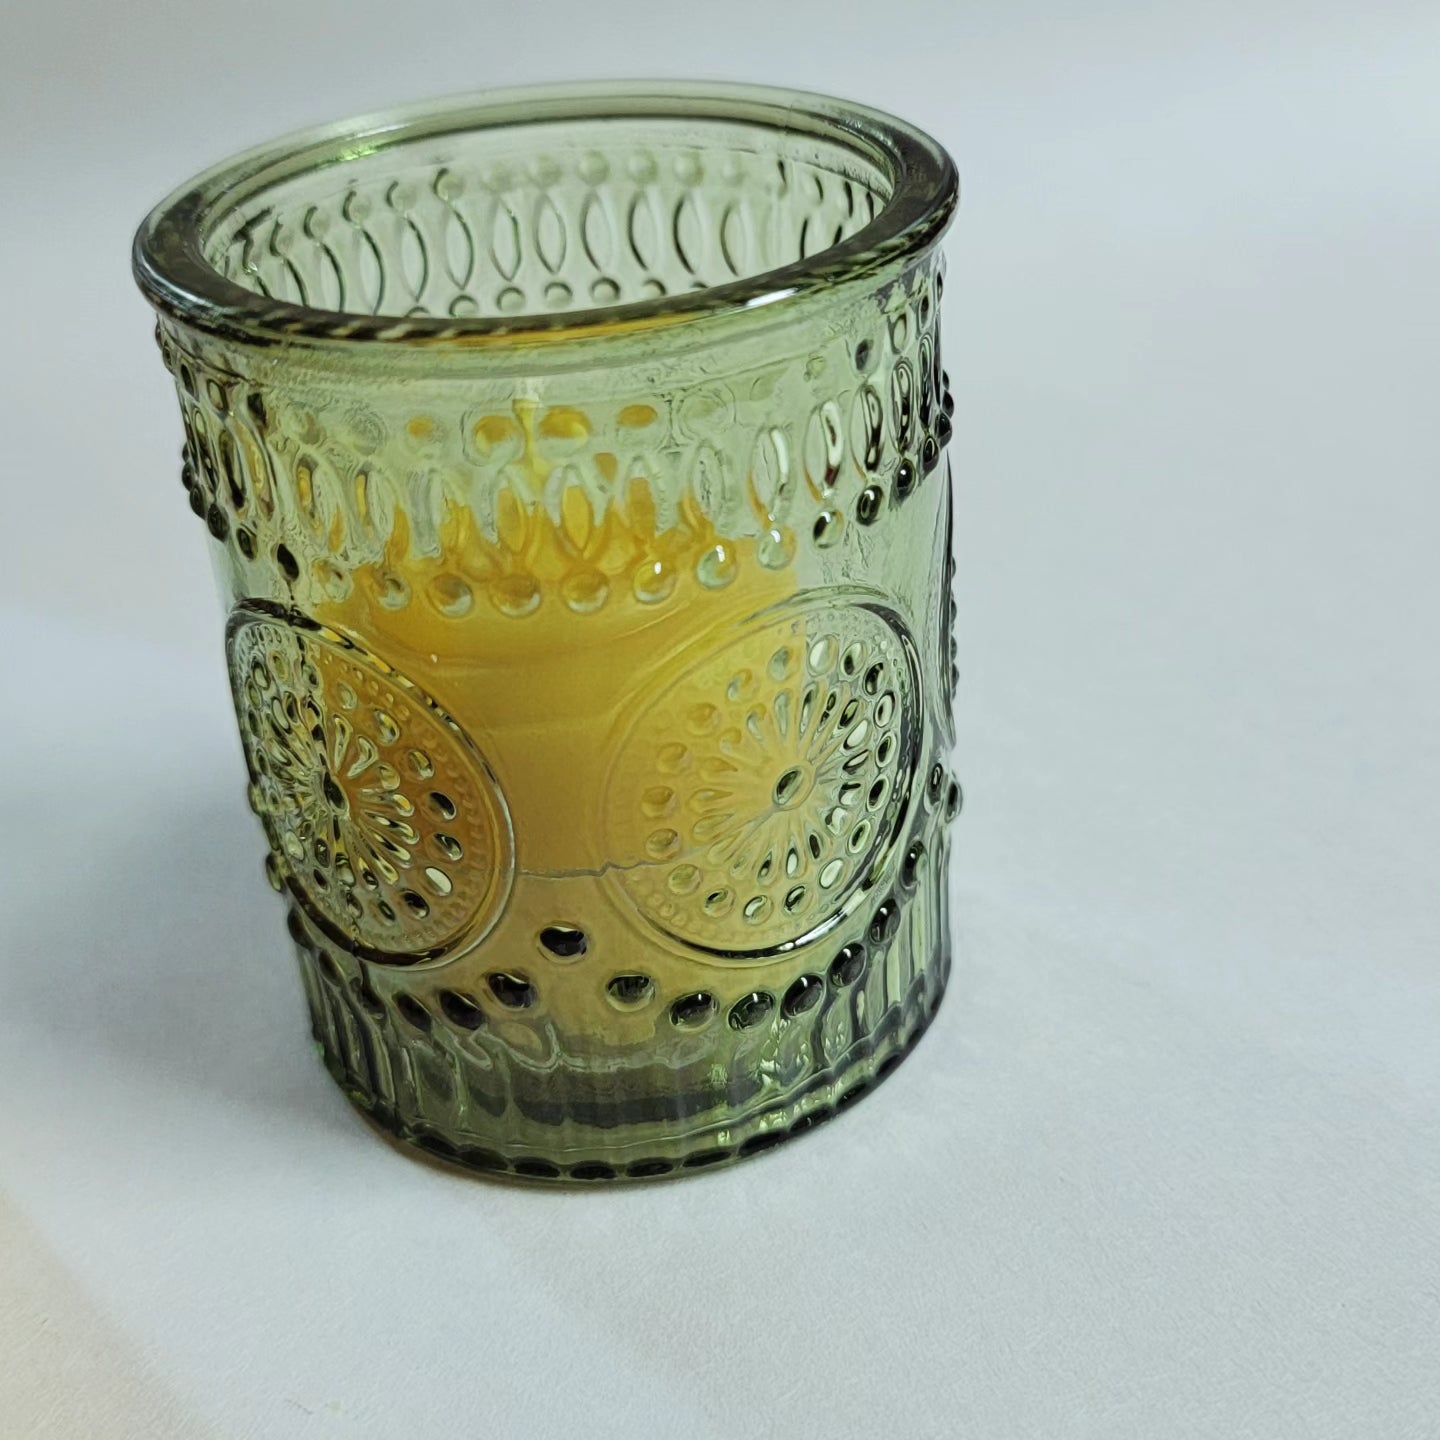 Green Sea Glass - Beeswax candle holder for tealights and votives